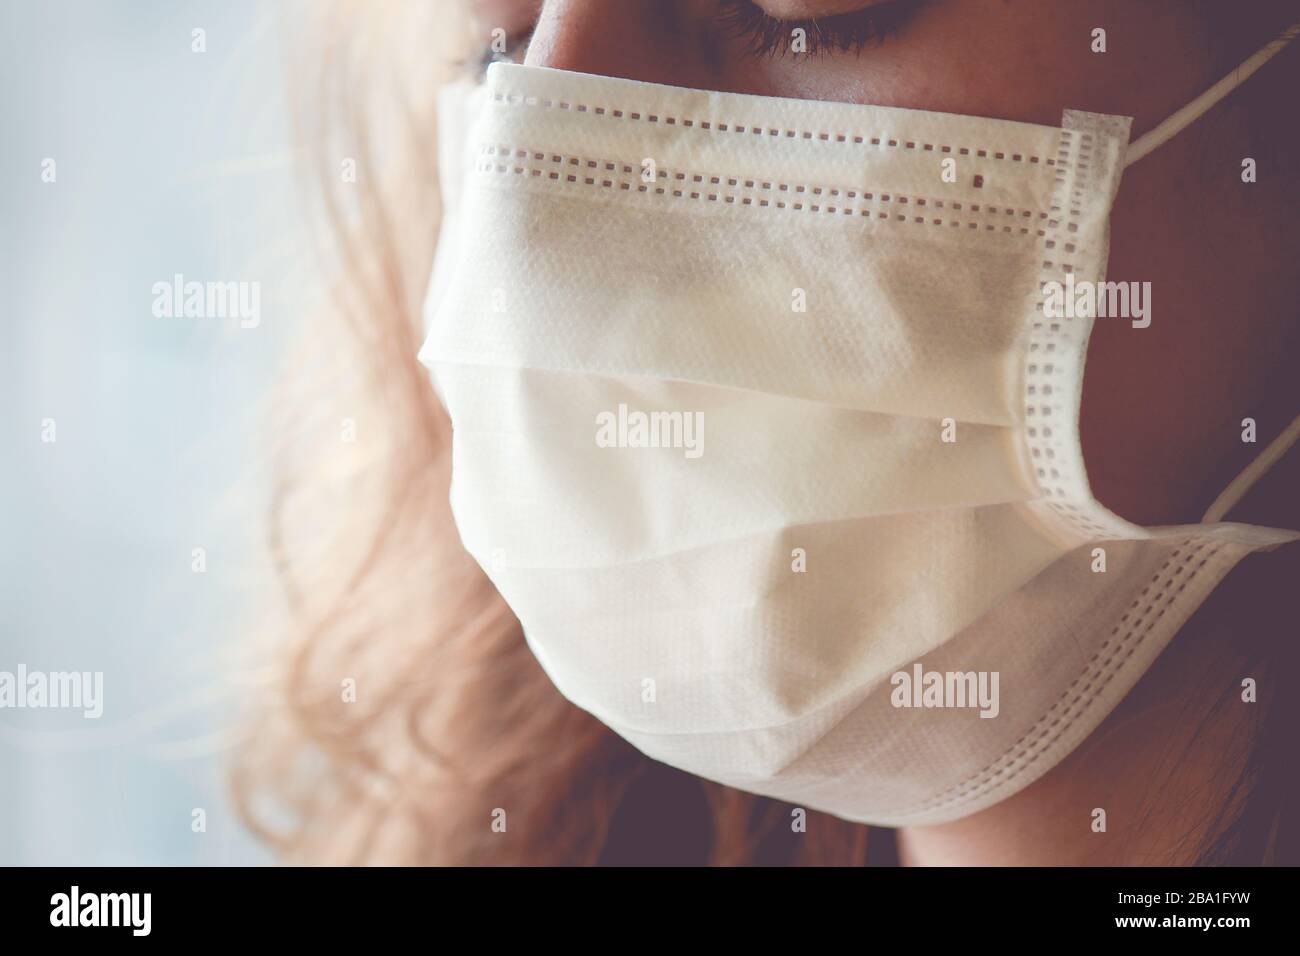 Detail of Caucasian woman wearing a white medical face mask. Woman is crying, closed eyes. Focus on the front part of the face, blurred background. Coronavirus, COVID-19 quarantine. Nurse concept. Stock Photo